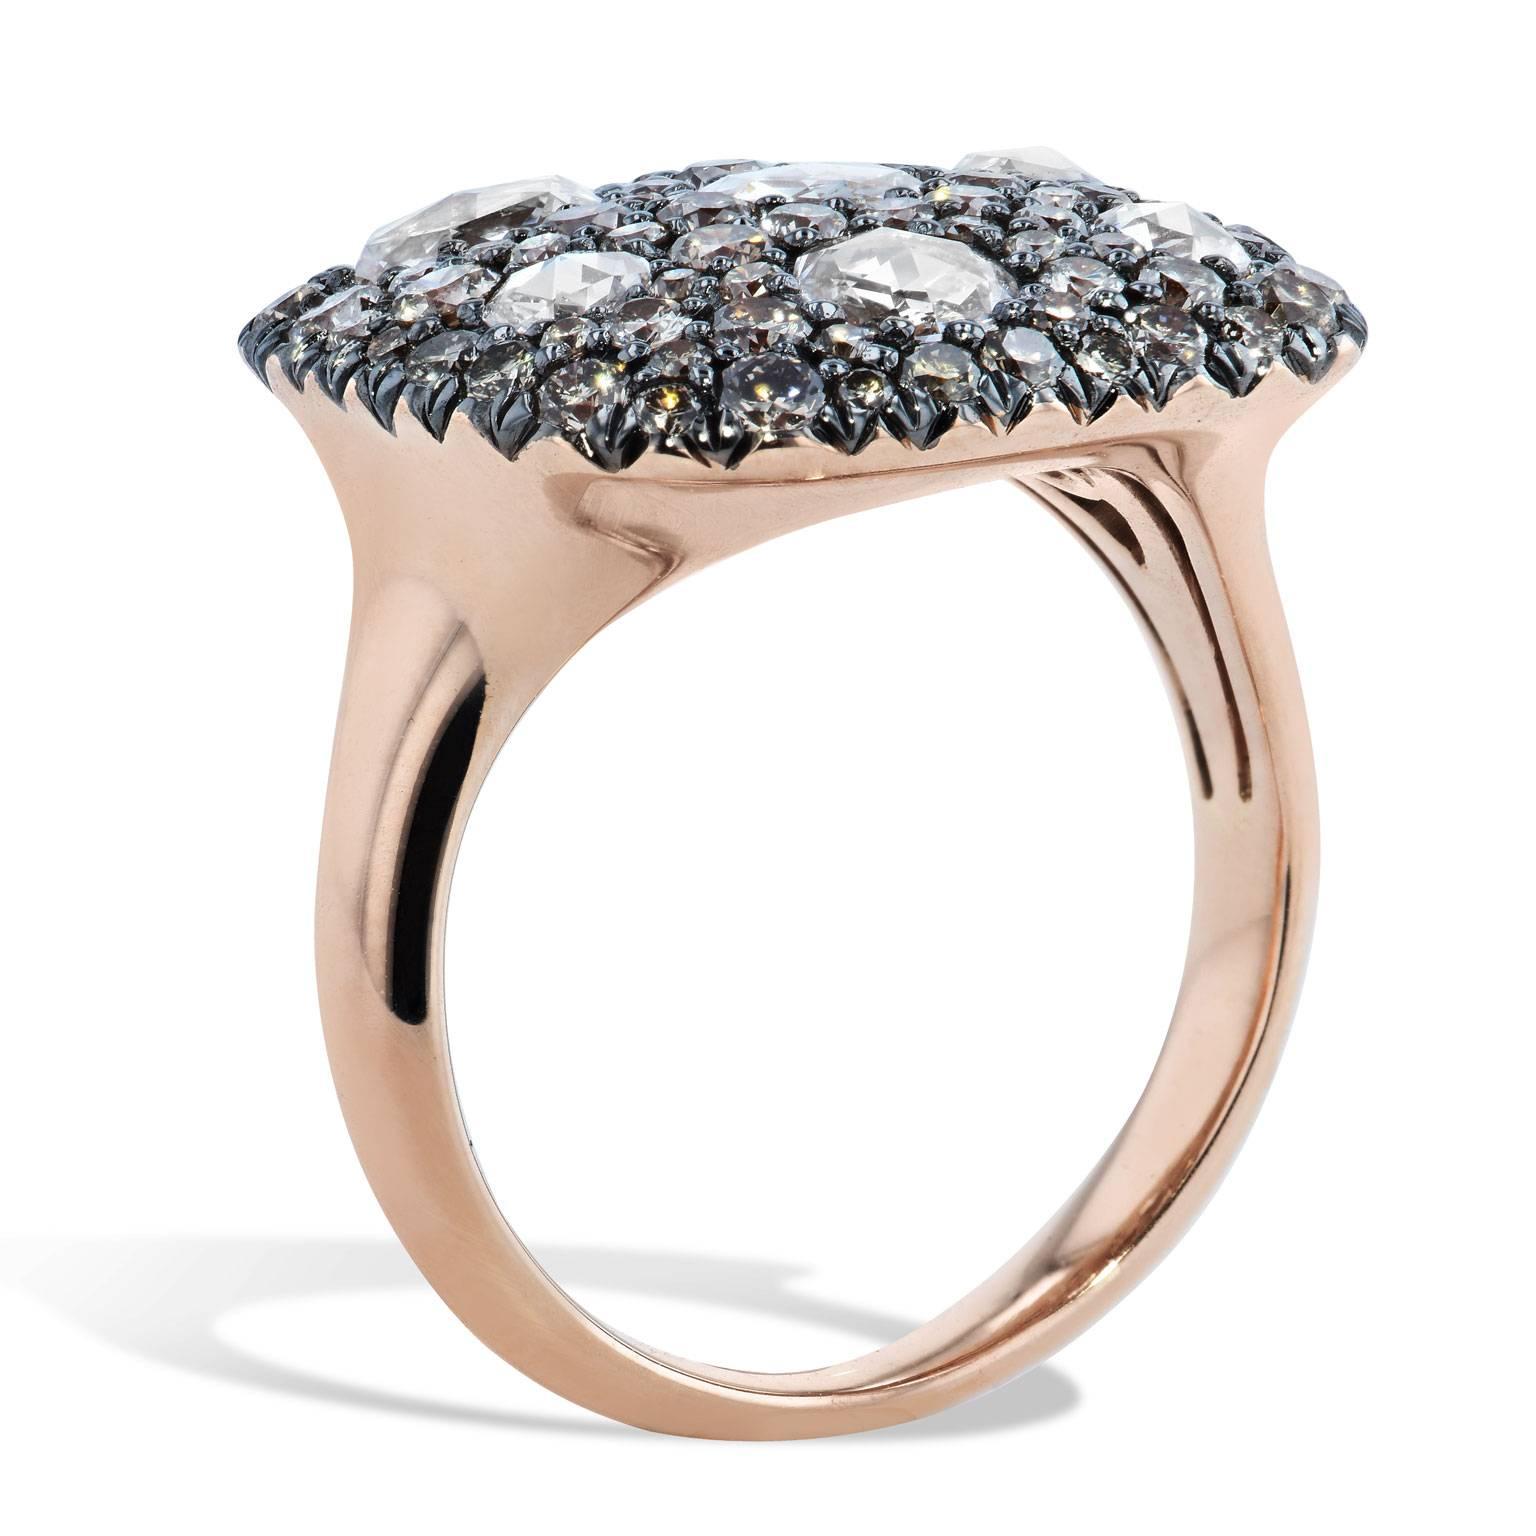 1.05 carat of round brilliant cut champagne diamonds and 1.13 carat of rose cut diamonds meld in a beautiful arrangement on cushion shape with rhodium prongs in this 18 karat rose gold fashion ring.
Size 6.5
Complementary sizing upon request